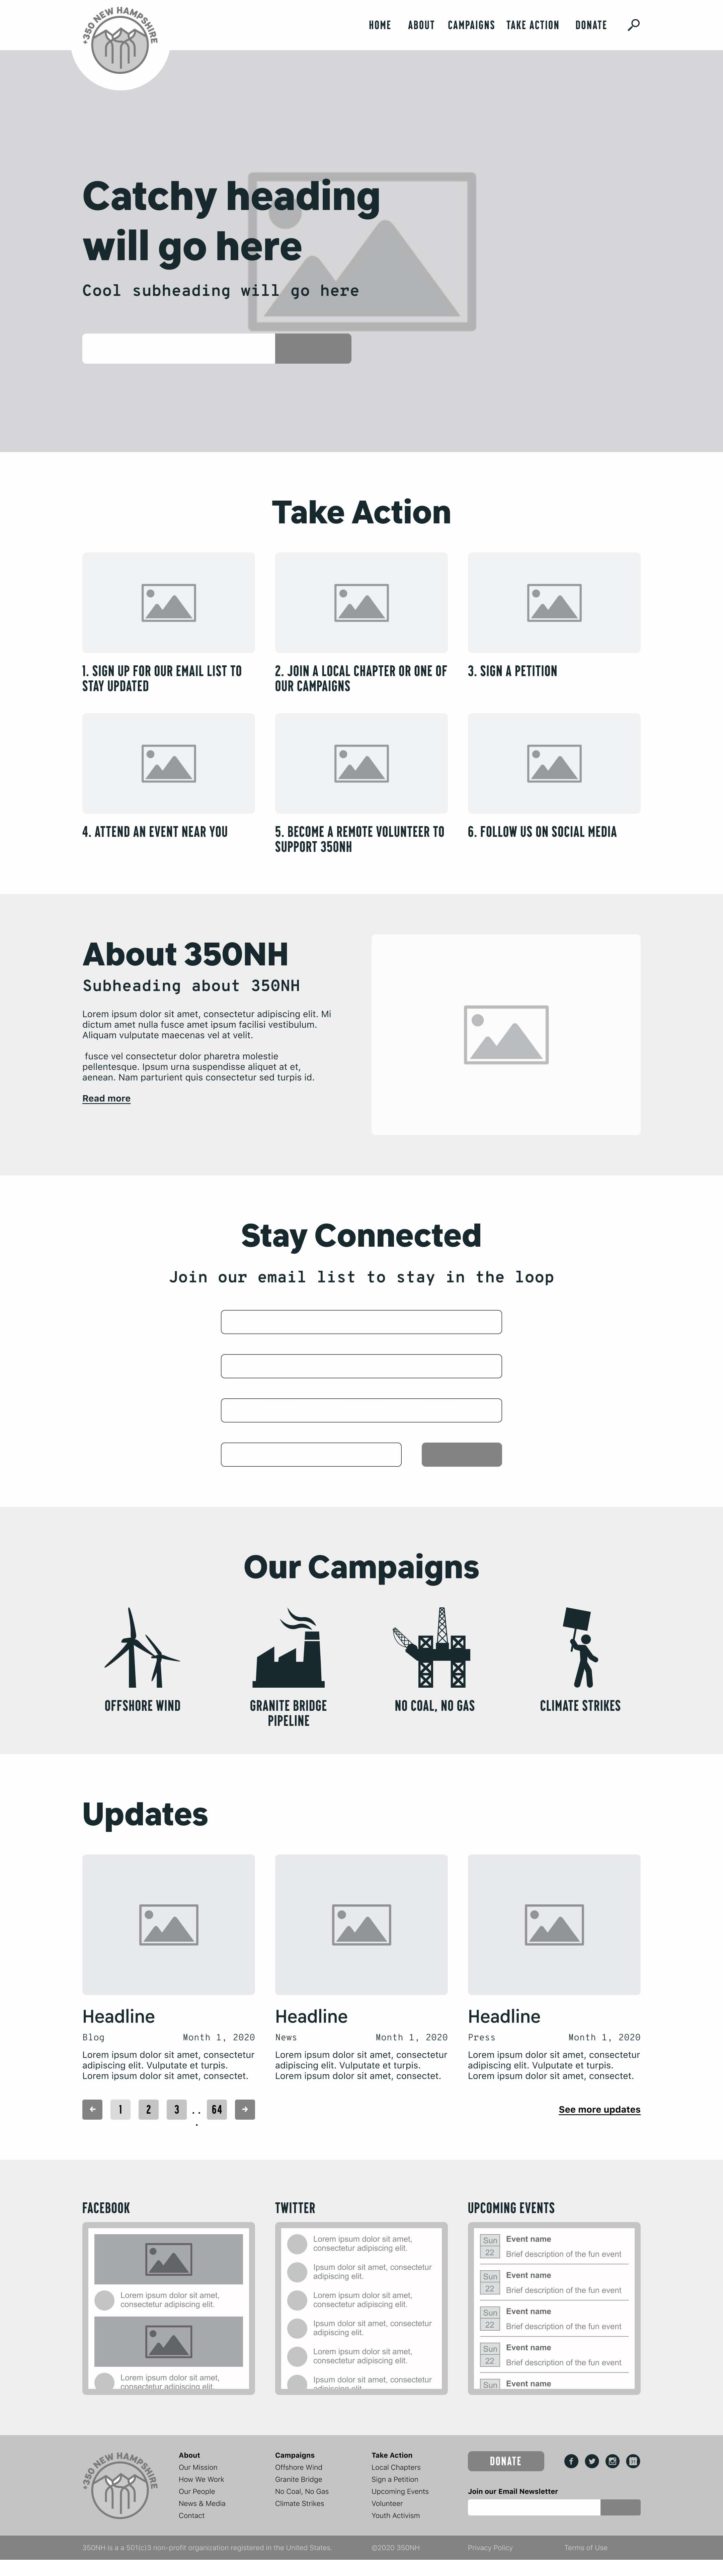 350NH Wireframe of Homepage